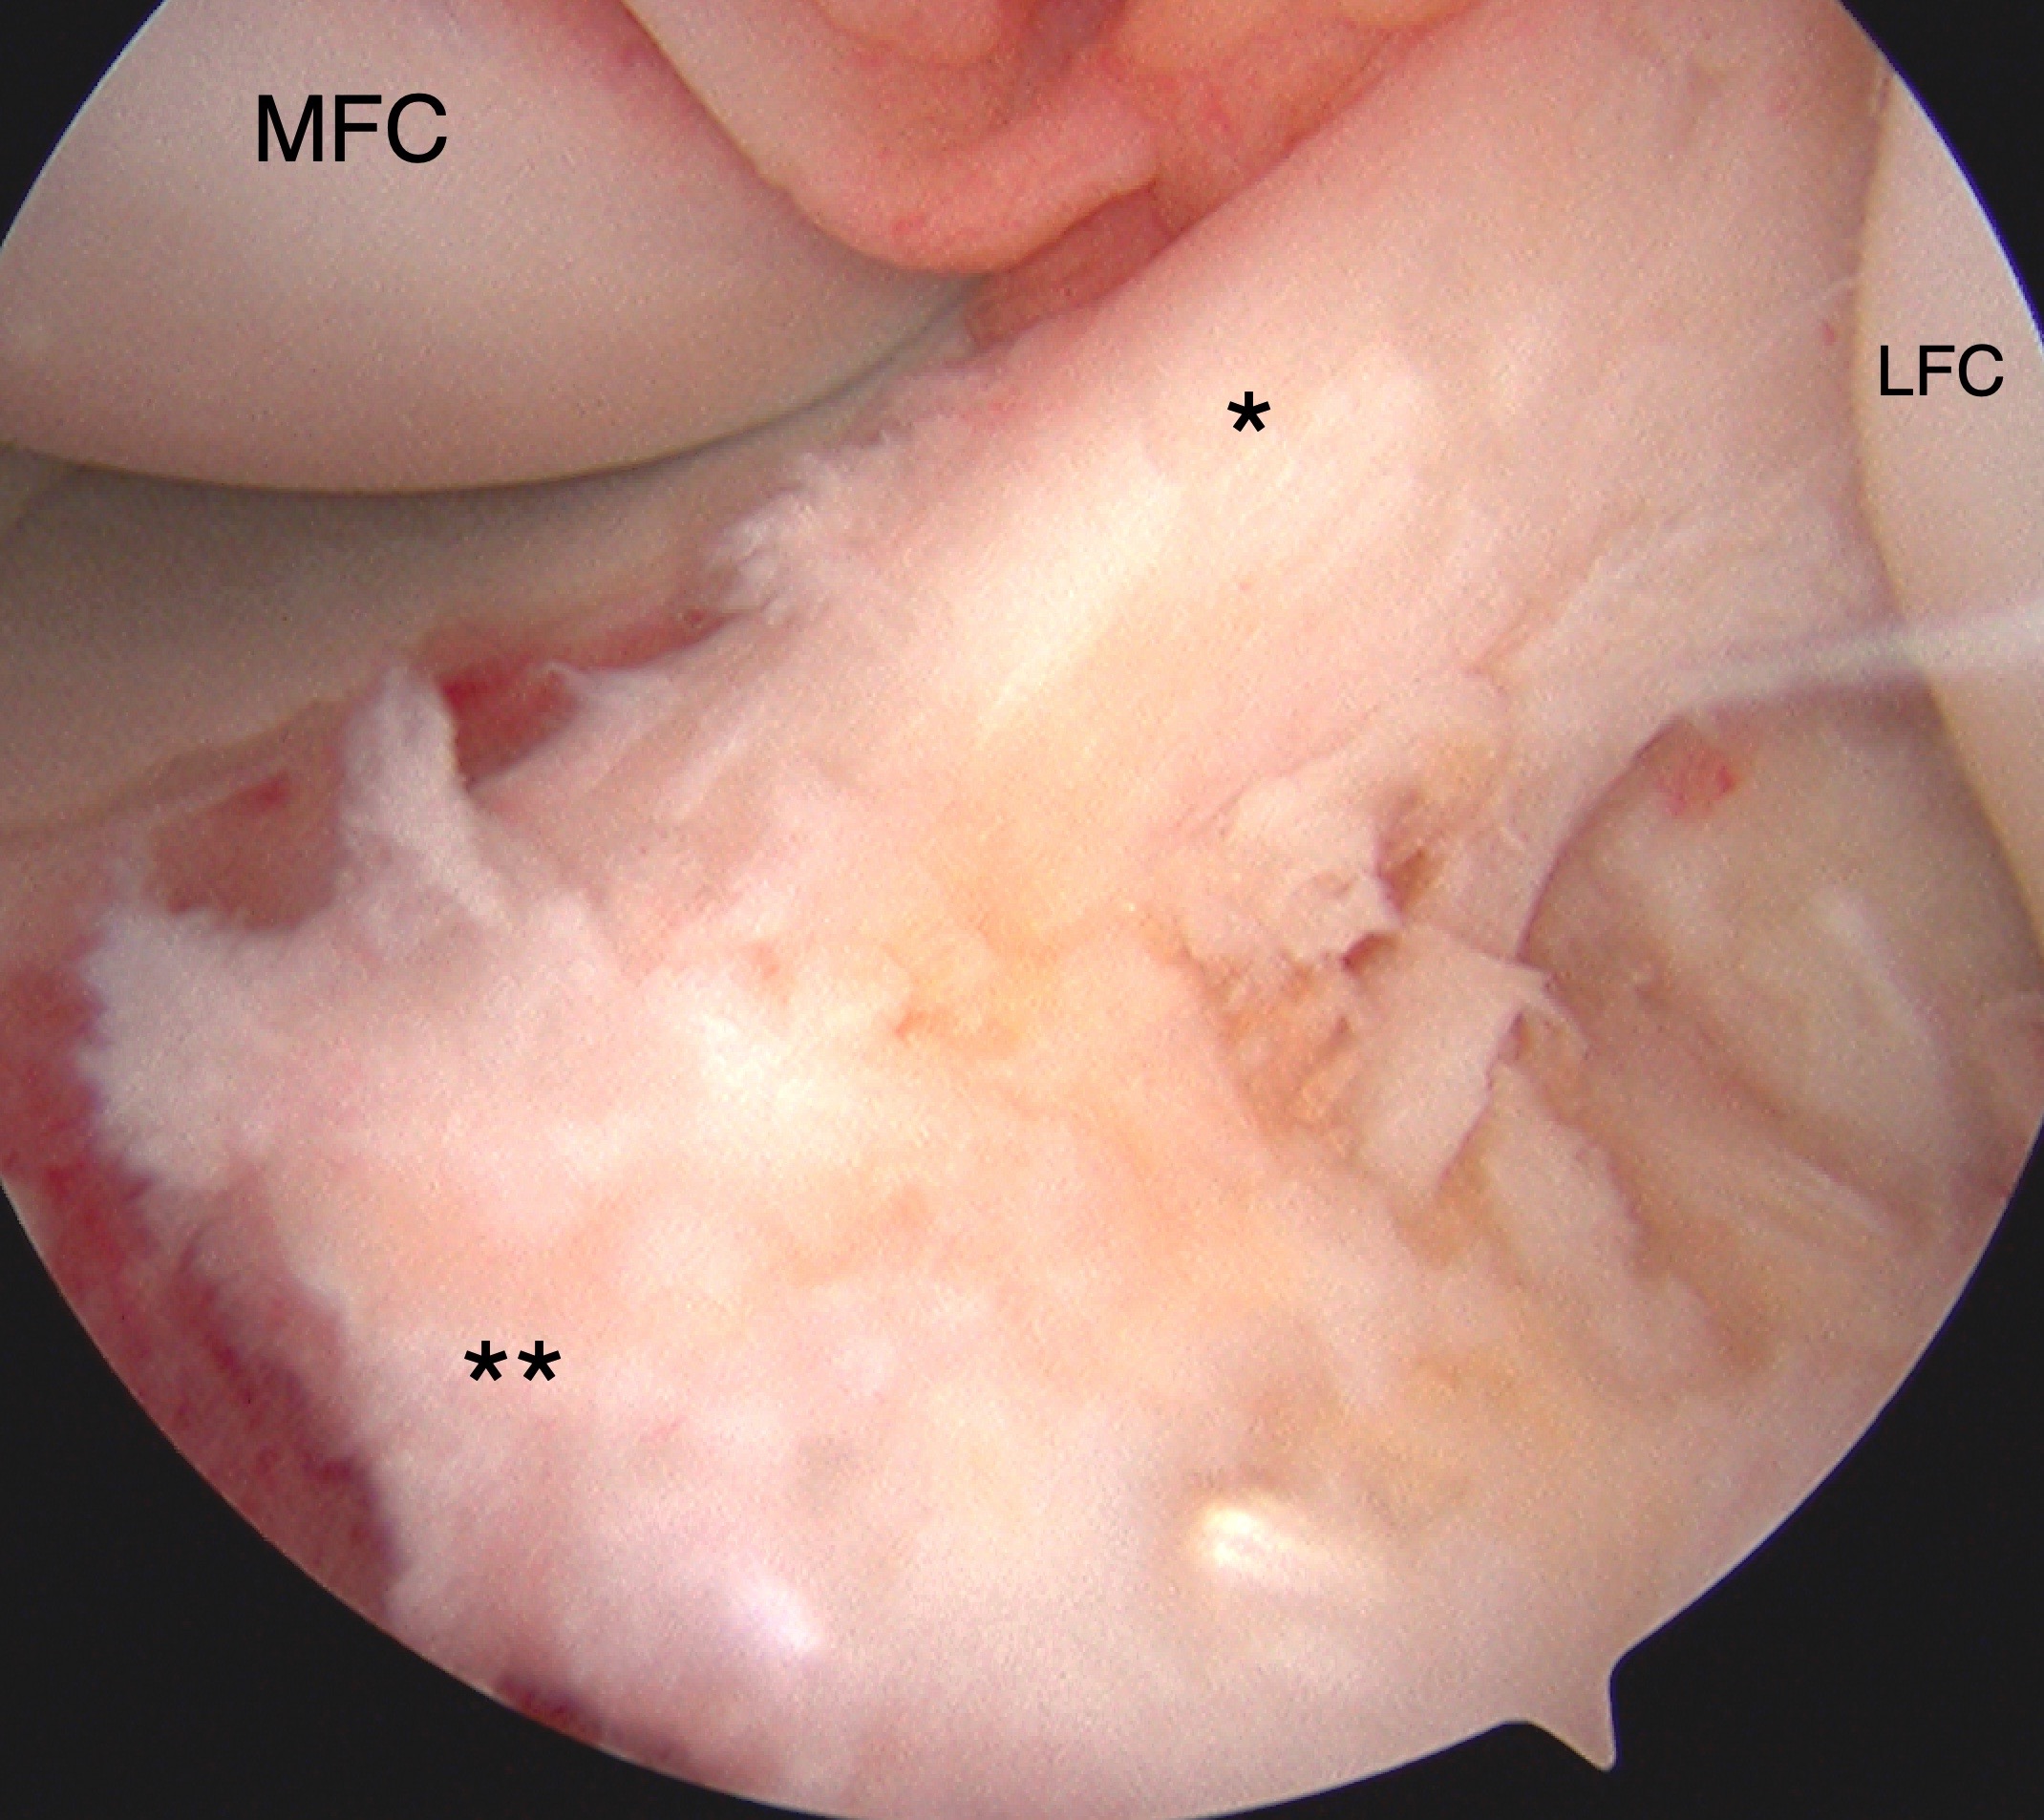 Tibial eminence avulsion injury confirmed with direct visualization during knee arthroscopy with arthroscopic-assisted internal fixation suture reduction technique.  The anterior cruciate ligament (*, ACL) and insertional footprint on the tibia (**) are denoted.  The medial (MFC) and lateral (LFC) femoral condyles are also labeled for reference.